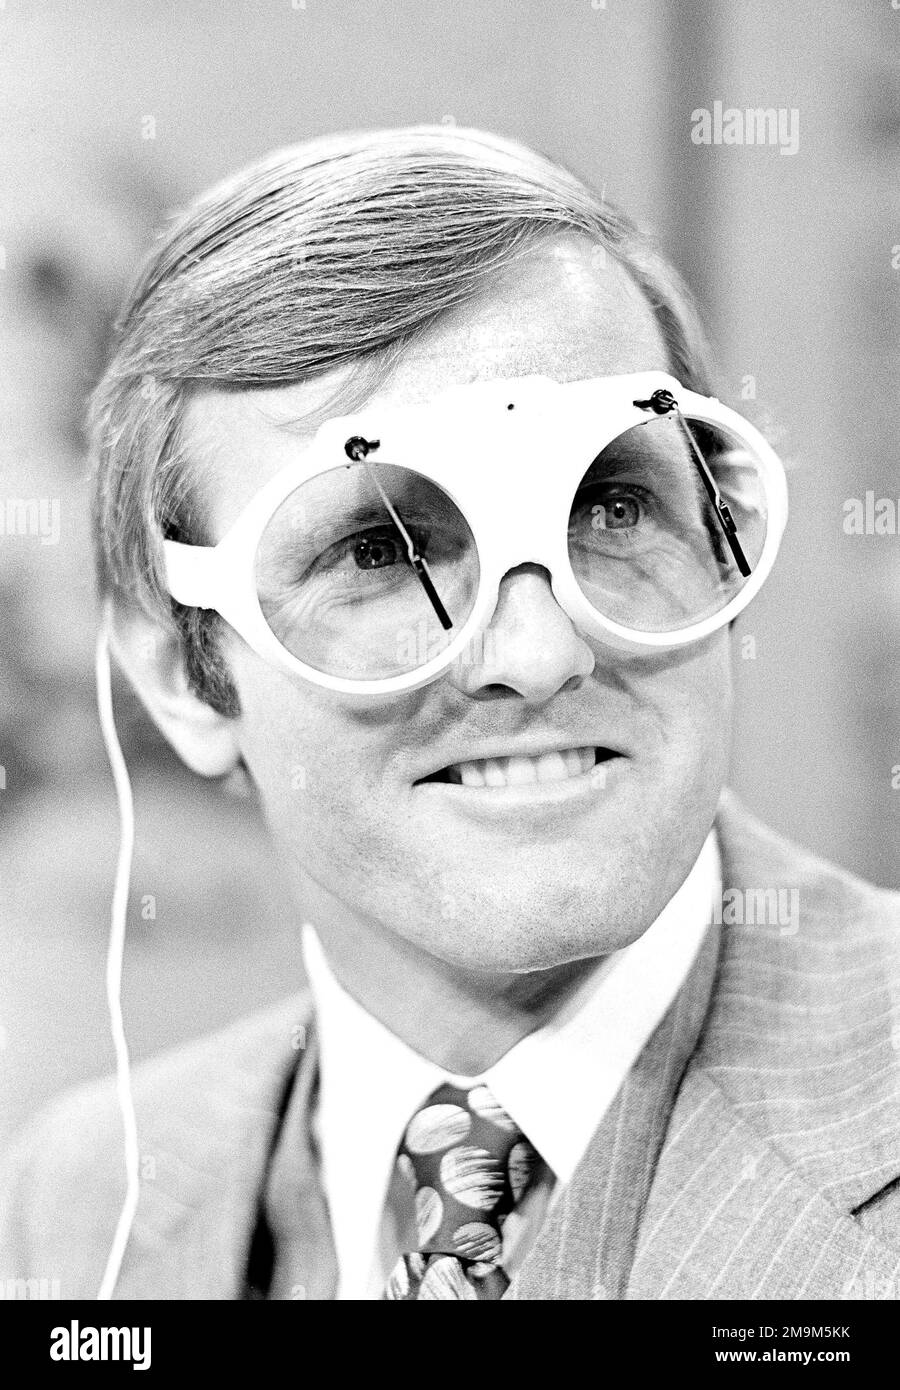 Miami Dolphin quarterback Bob Griese who earlier this season had problems with his contact lenses while playing, donned a pair of glasses with windshield wipers, Sept. 19, 1977, in Miami, Fla., as a joke while appearing on WPLG-TV in Miami which hosted the Don Shula Show. Griese seemed to have solved his eyeglass problems earlier as the Dolphins defeated the Buffalo Bills the night before but with regular glasses. (AP Photo/Phil Sandlin) Stockfoto